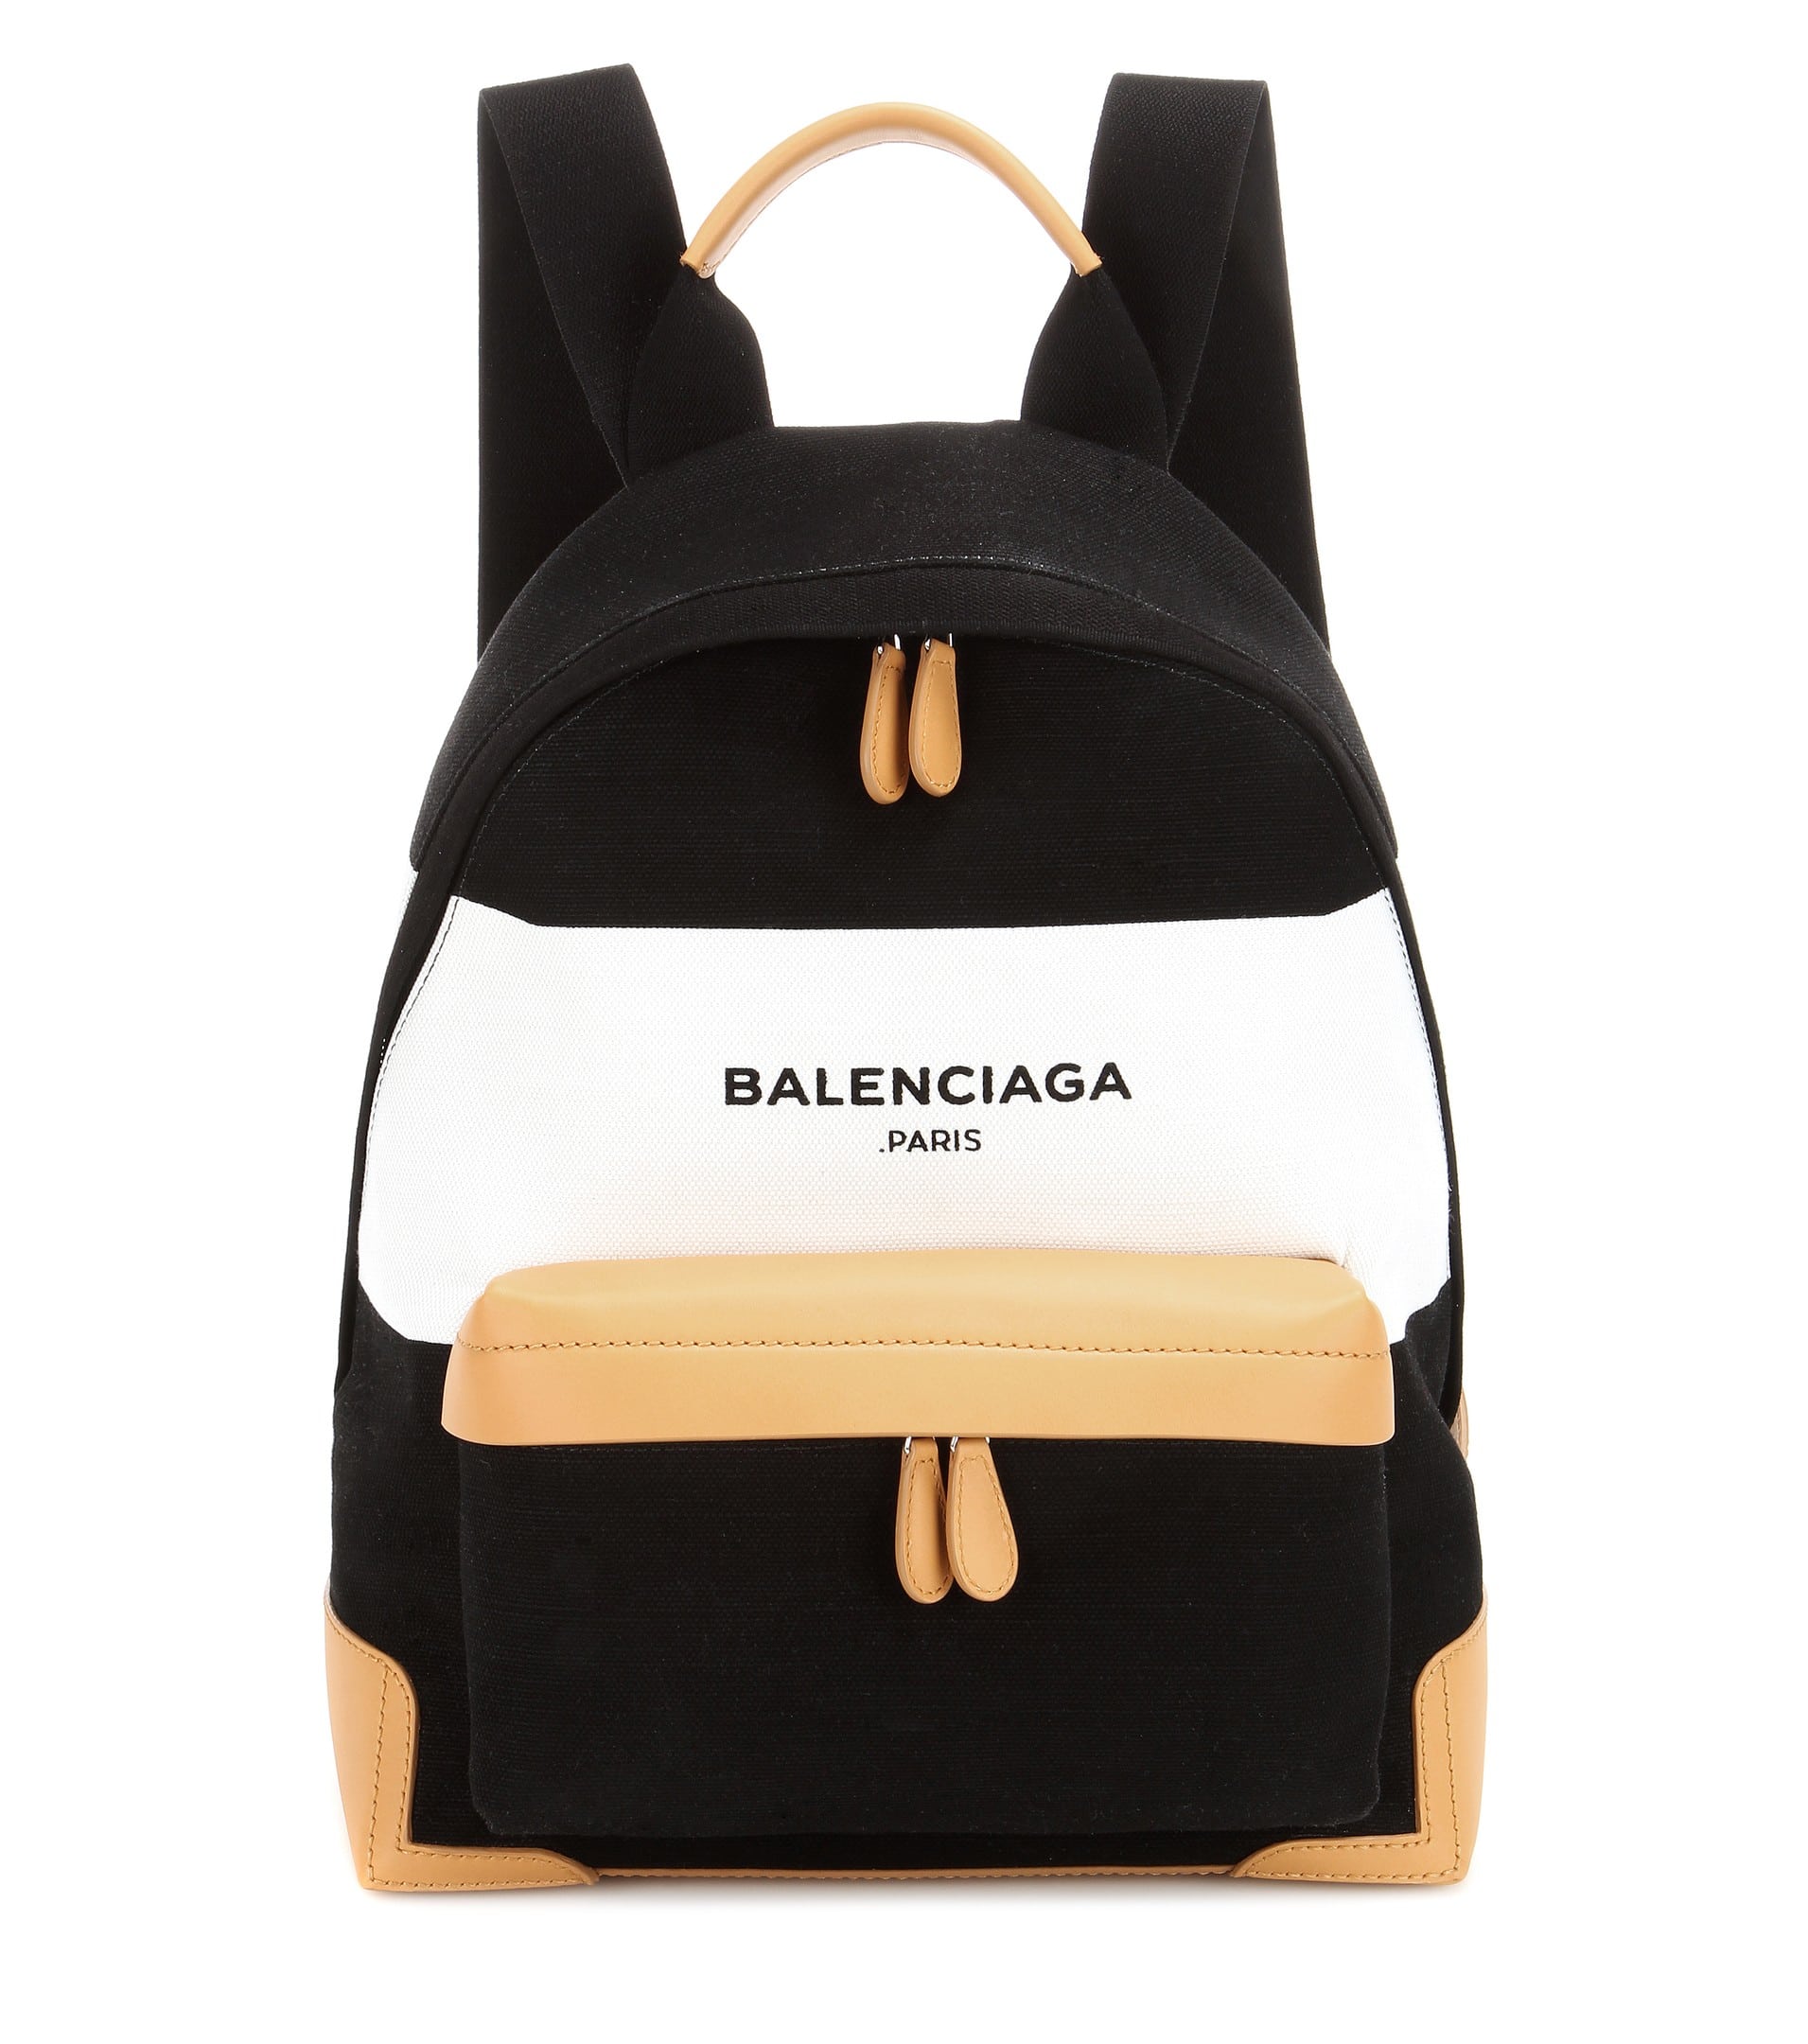 Balenciaga Bag Price List Reference Guide – Spotted Fashion